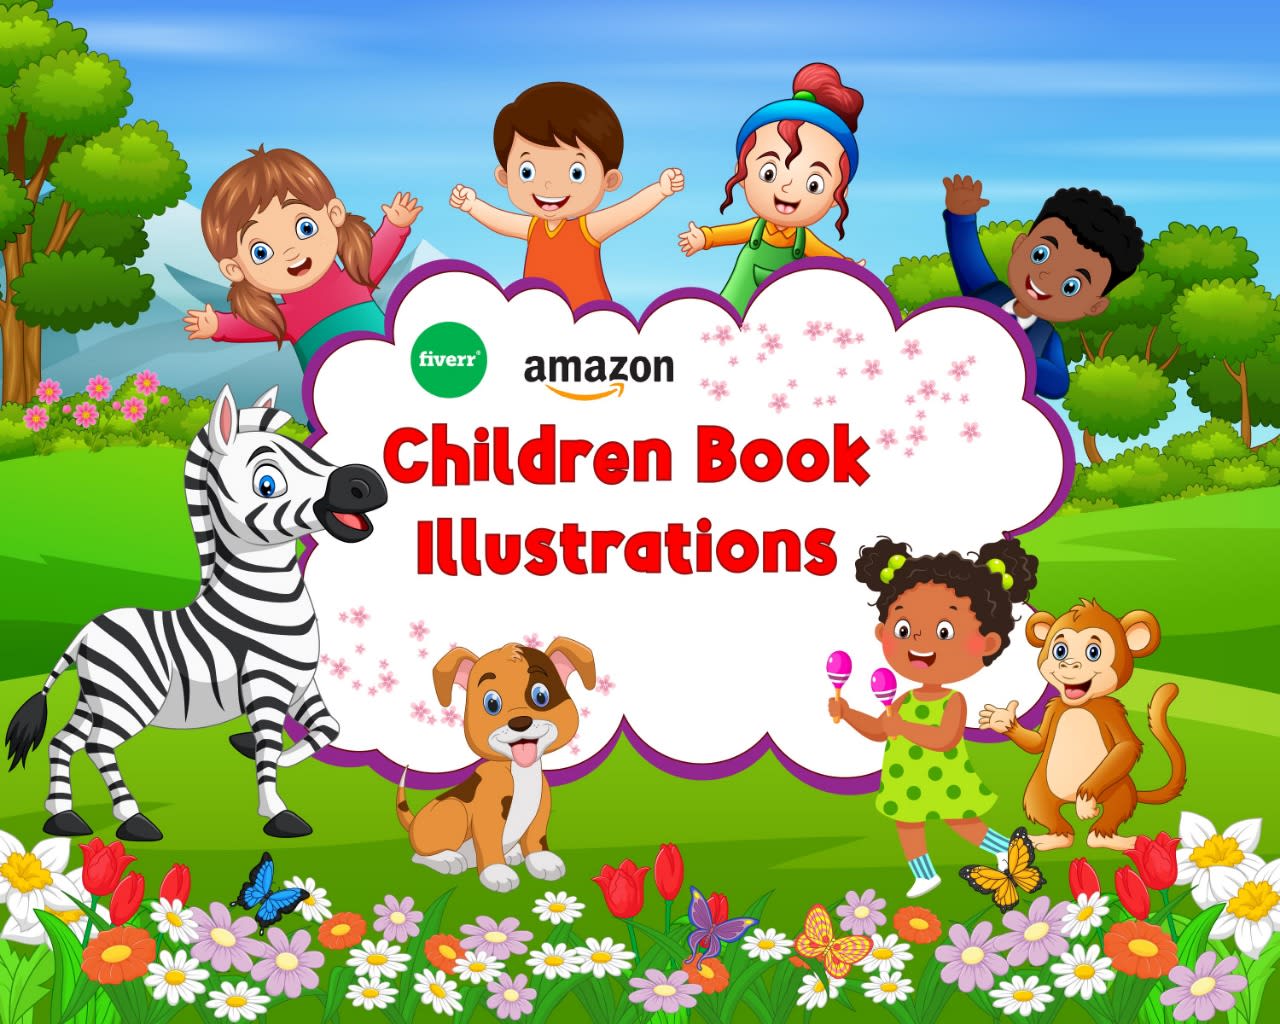 Make children book story illustrations, kids book covers and characters by  Jr_graphics786 | Fiverr